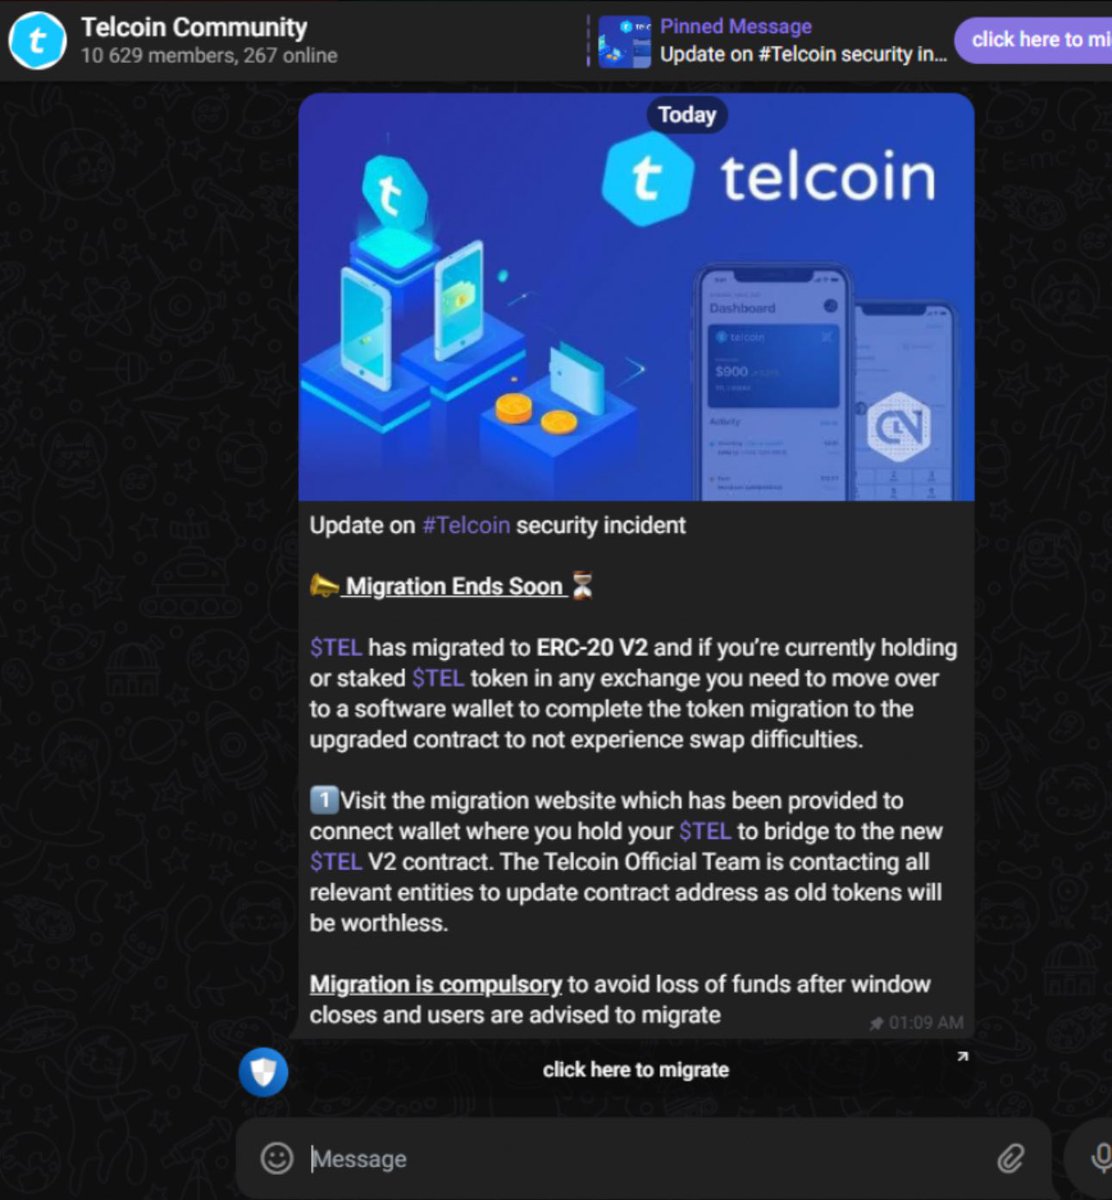 This is a scam. Don’t fall for it There is no migration website. You don’t have to do anything. Do not interact with this message and please report whatever this account is as scam $tel #telfam